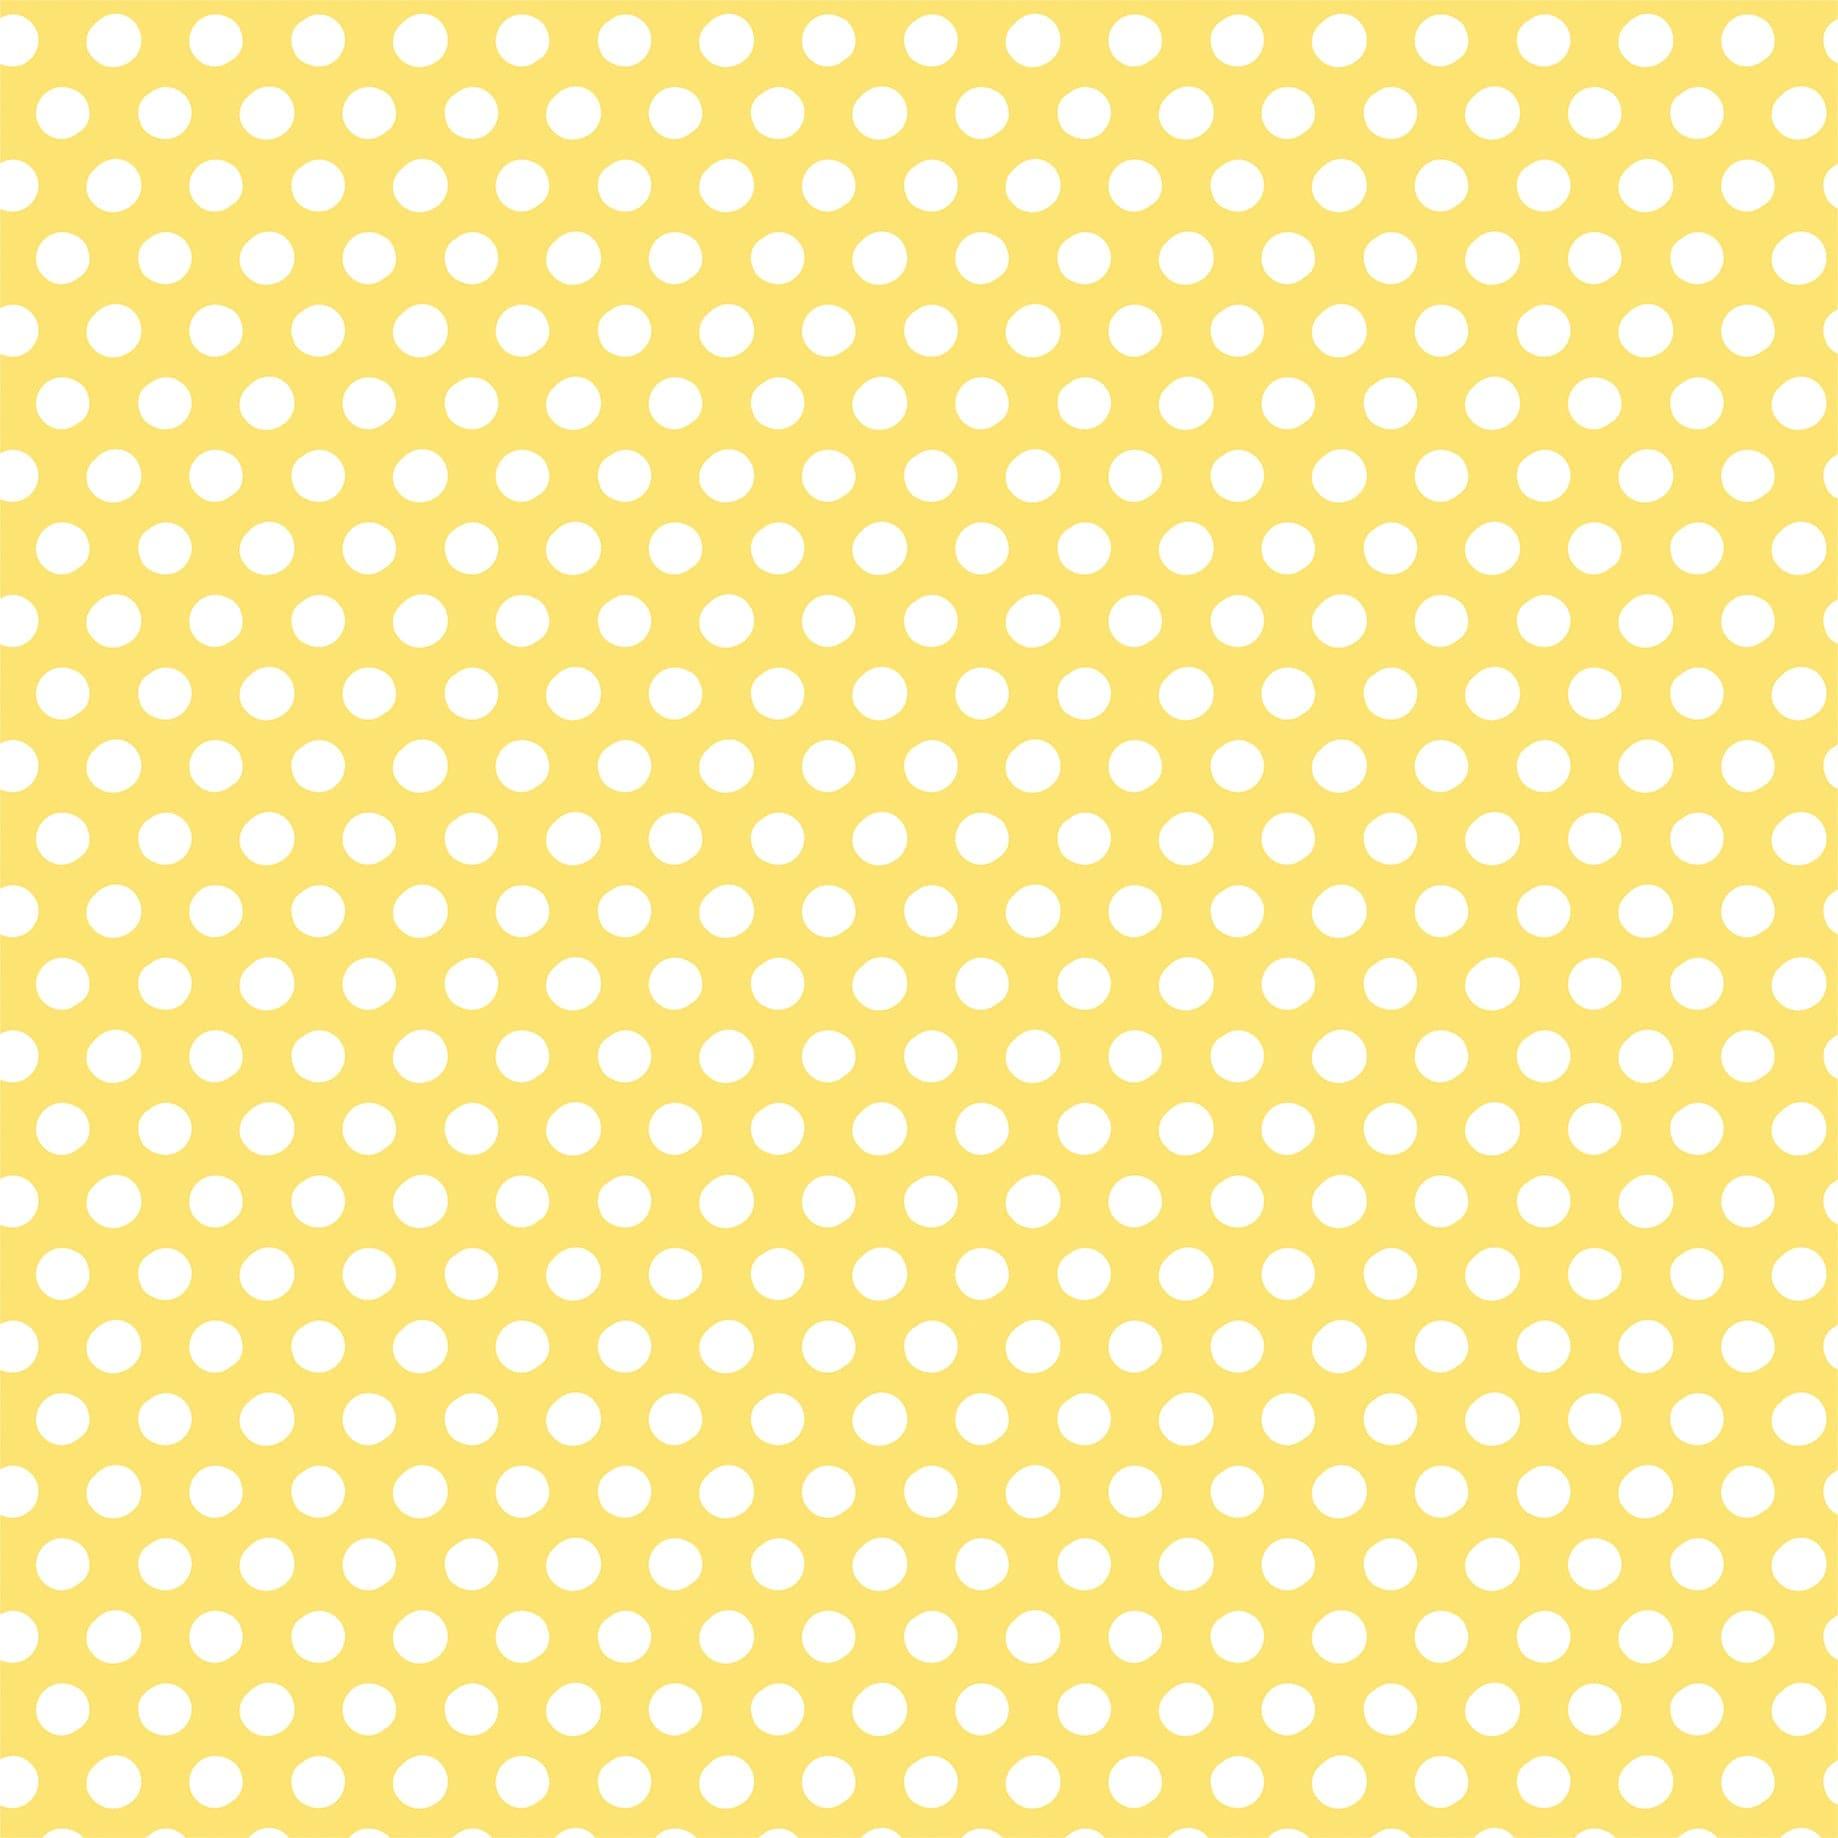 Sun Kissed Collection Happy Banners 12 x 12 Double-Sided Scrapbook Paper by Echo Park Paper - Scrapbook Supply Companies